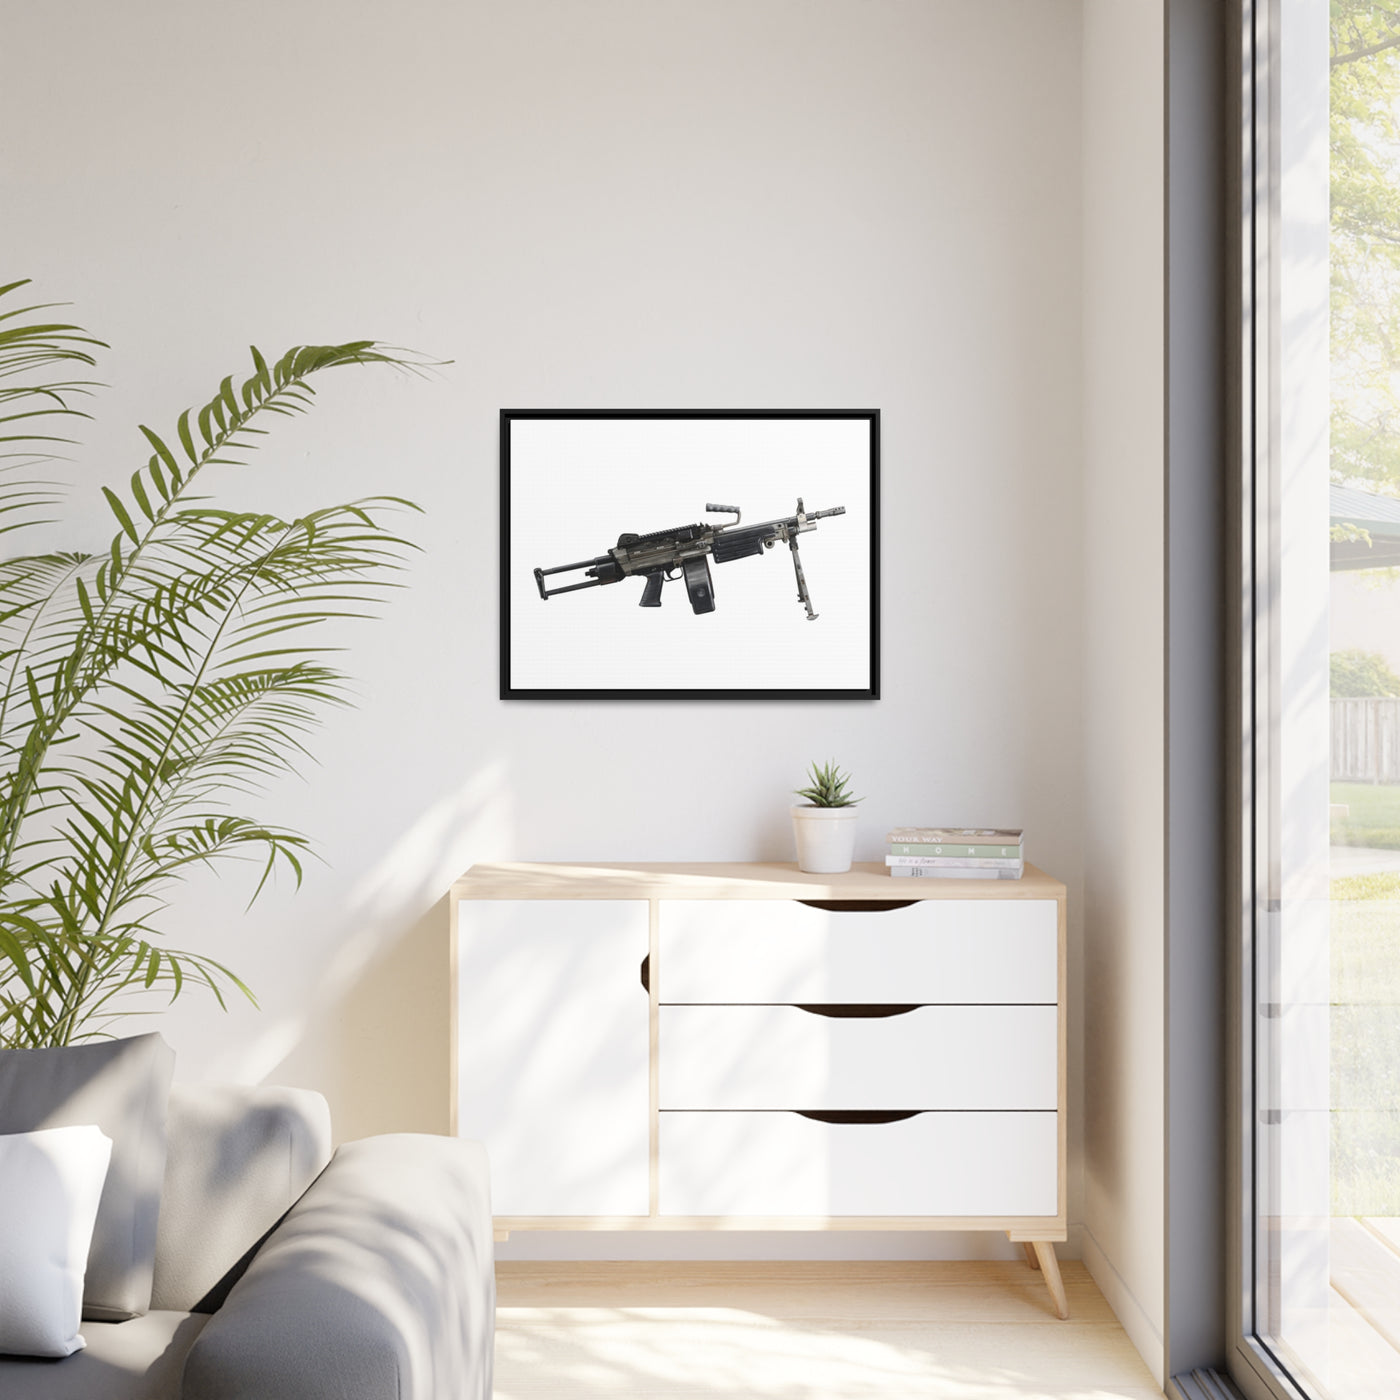 Belt-Fed 5.56x45mm Light Machine Gun Painting - Just The Piece - Black Framed Wrapped Canvas - Value Collection